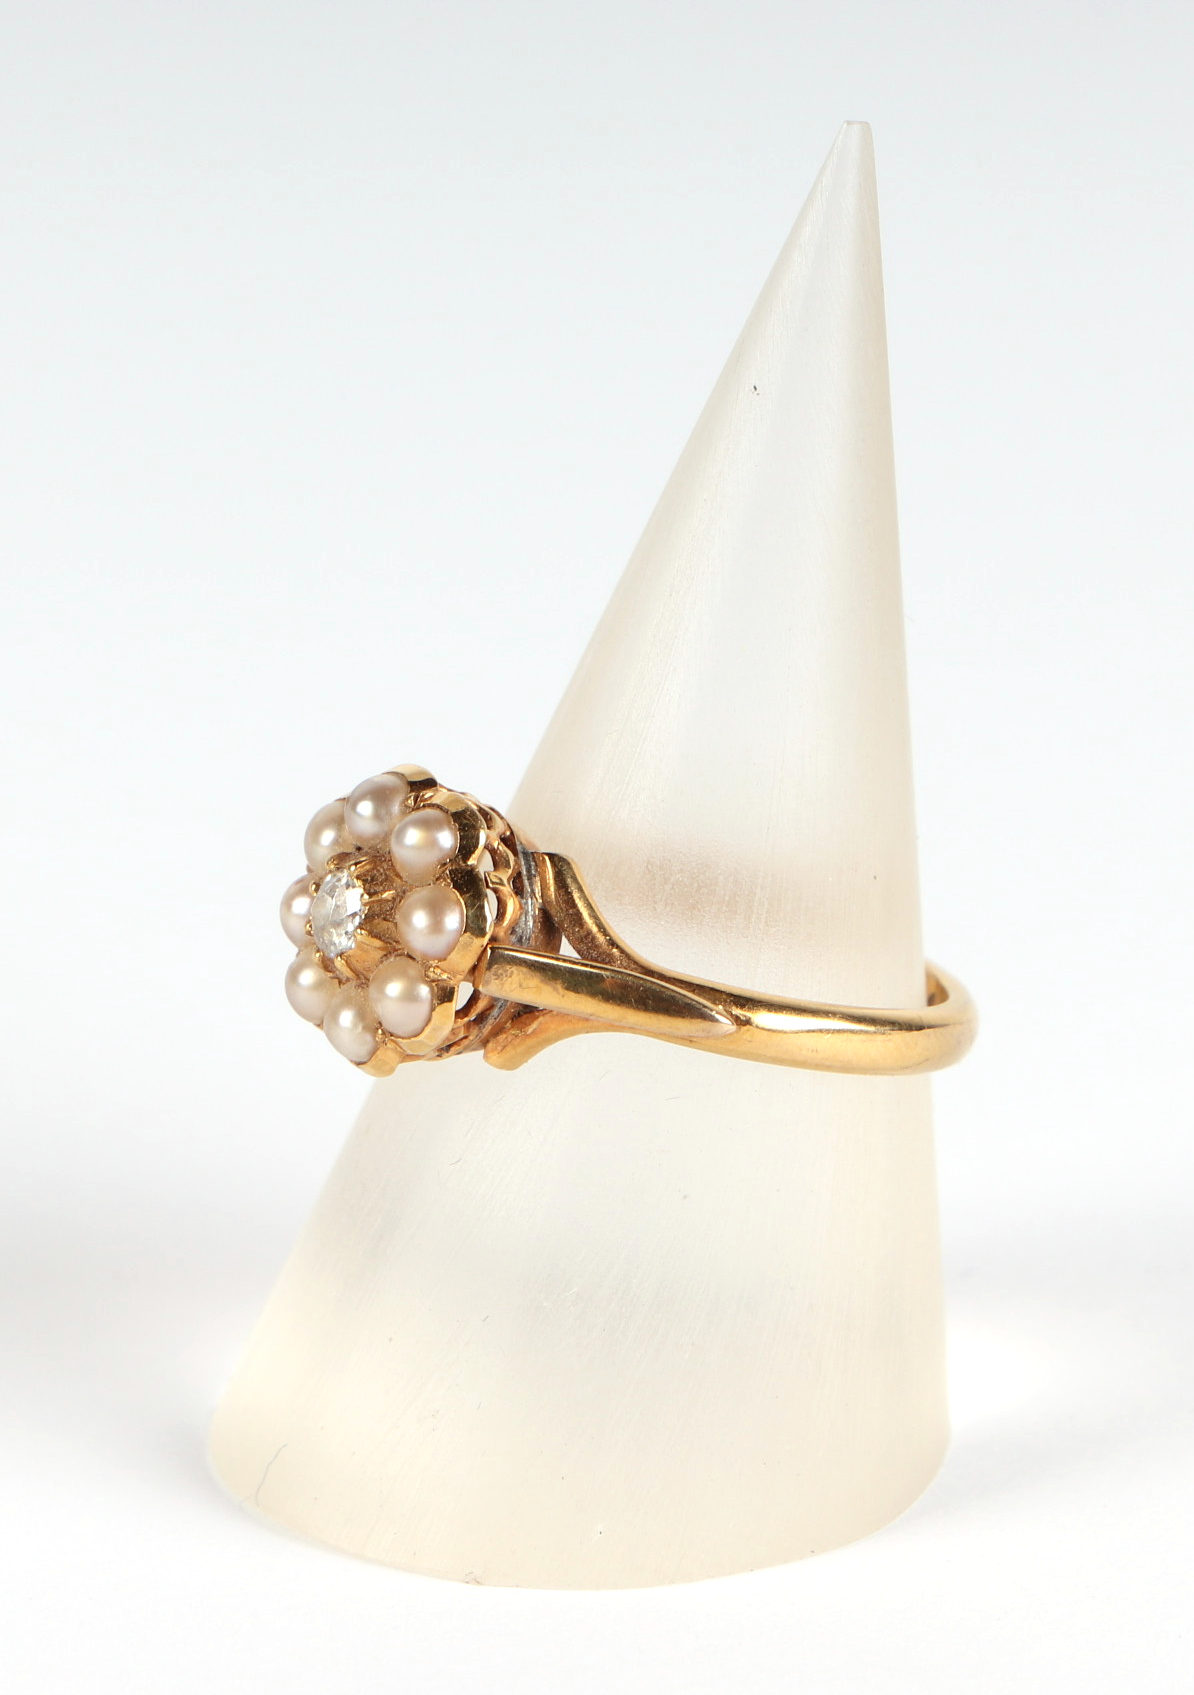 An antique 9ct gold seed pearl and diamond ring, 2.9g, approx. UK size L - Image 3 of 5